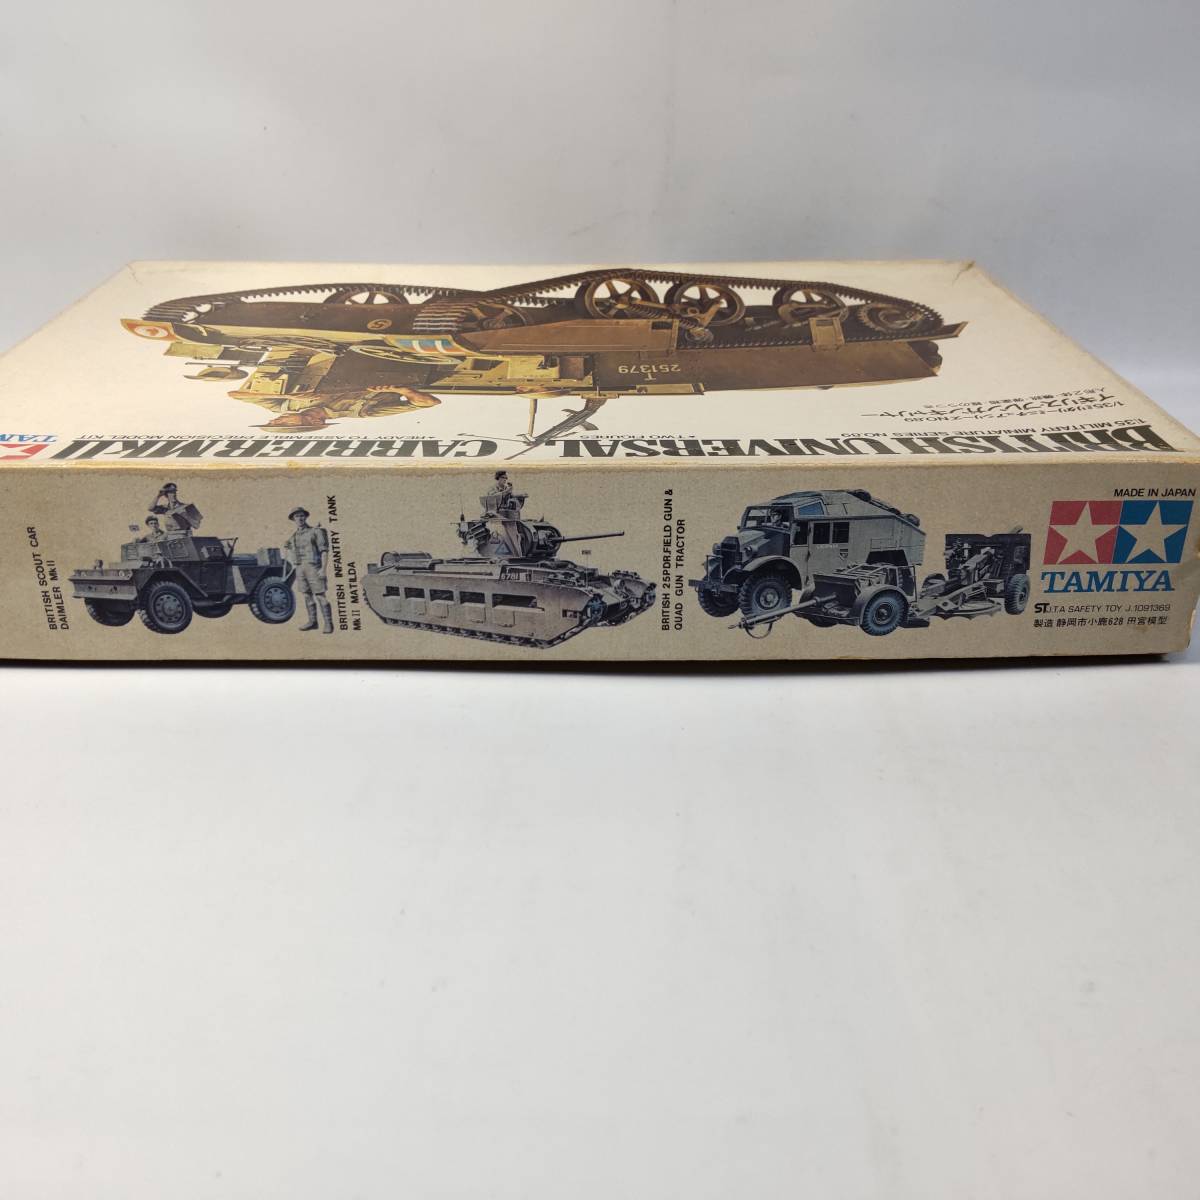 1/35b brick n* carrier England army figure 2 body attaching Tamiya model small deer Tamiya breaking the seal settled used not yet constructed plastic model rare out of print 